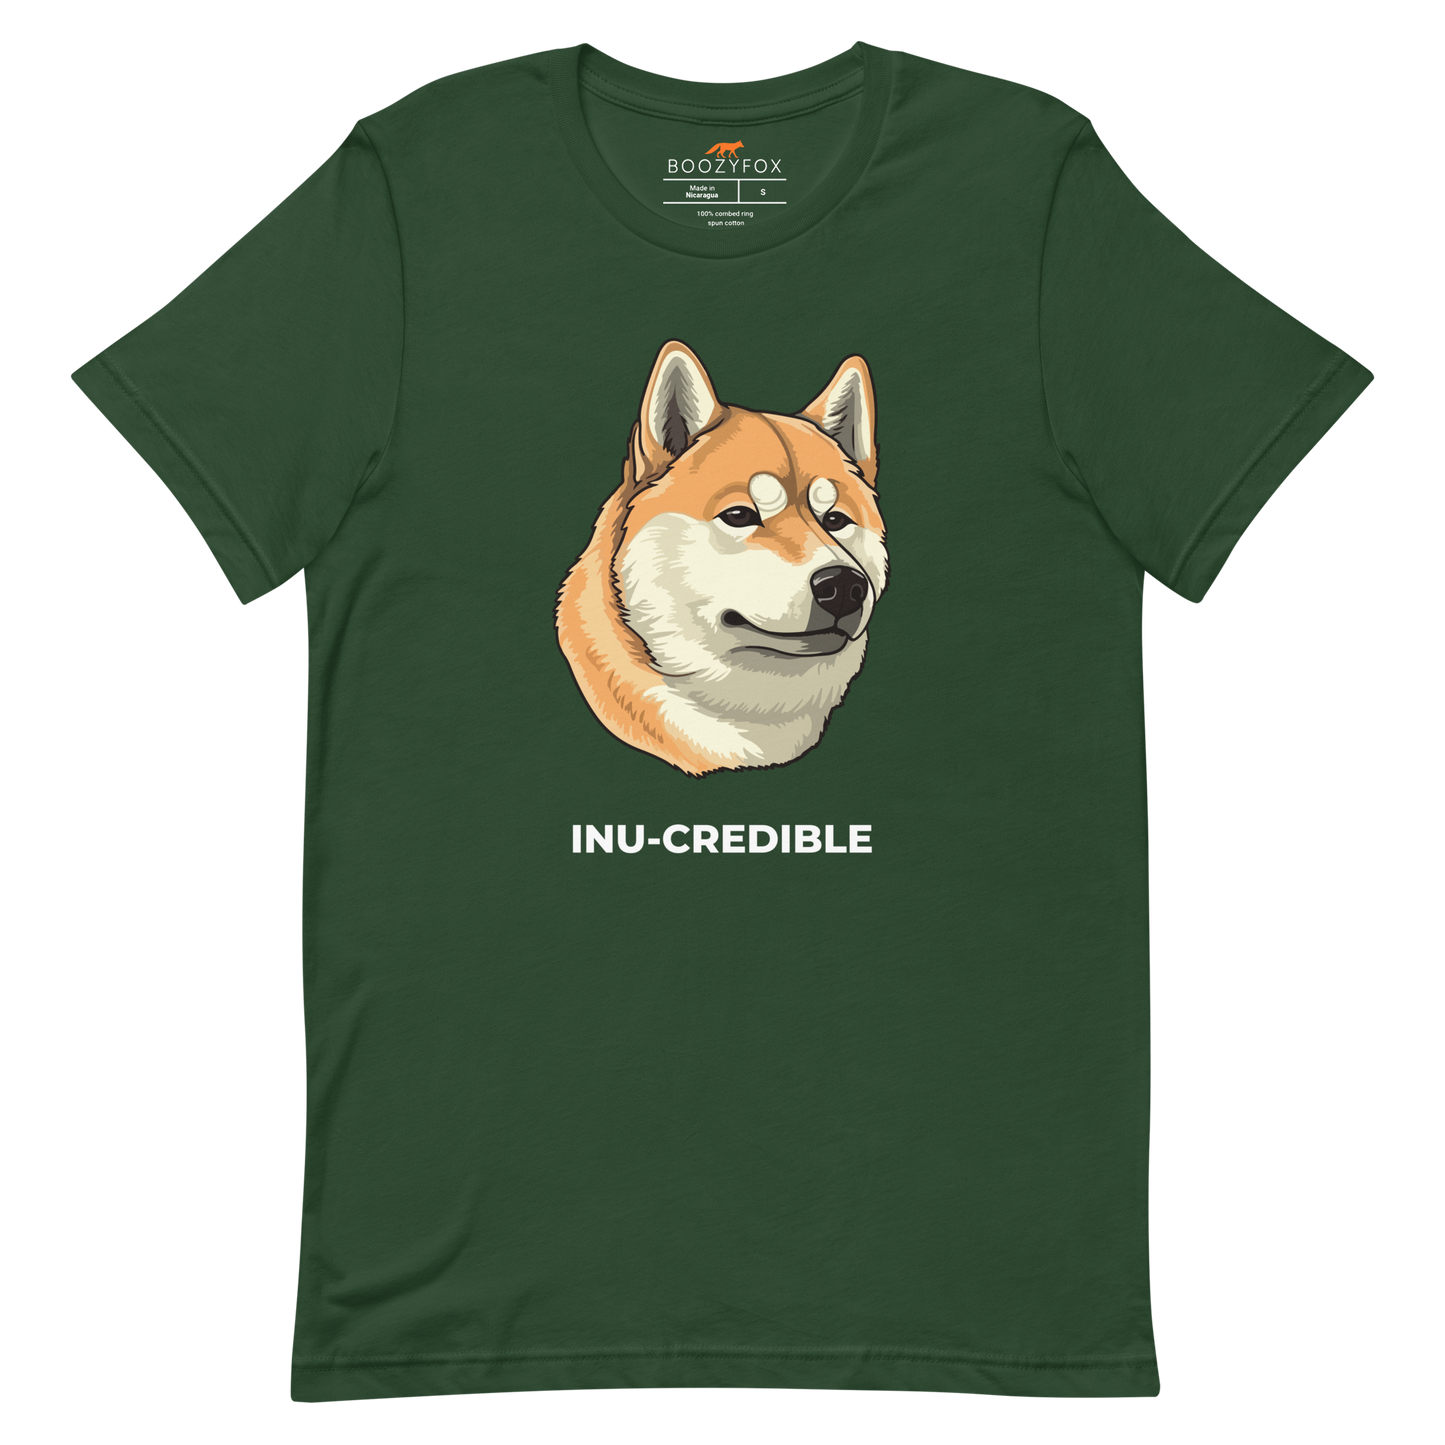 Forest Green Premium Shiba Inu T-Shirt featuring the Inu-Credible graphic on the chest - Funny Graphic Shiba Inu Tees - Boozy Fox